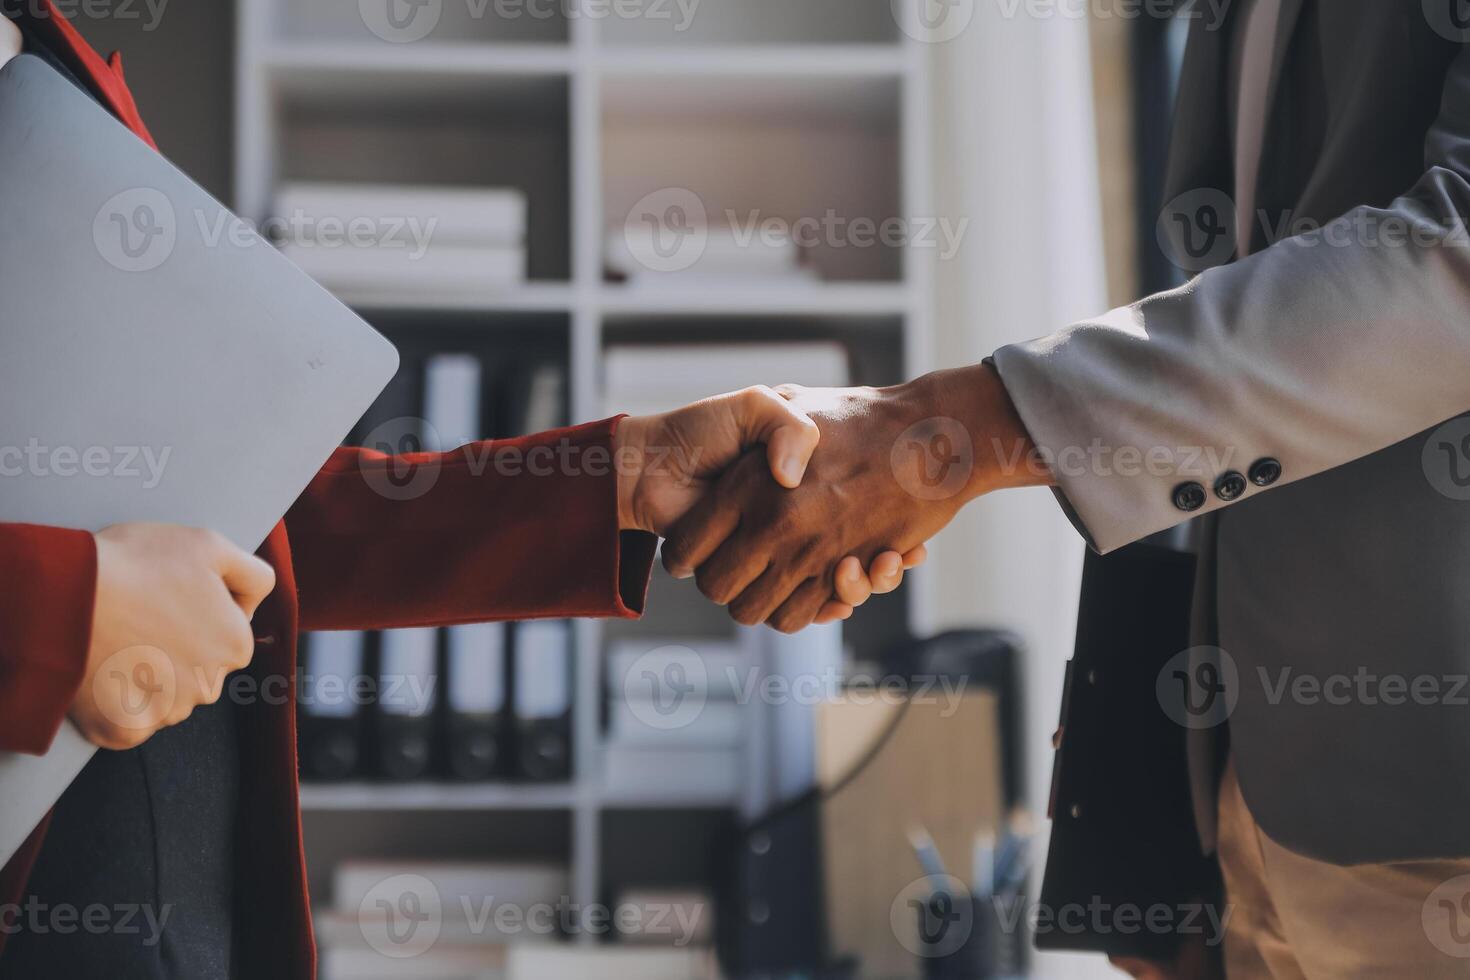 Business handshake for teamwork of business merger and acquisition,successful negotiate,hand shake,two businessman shake hand with partner to celebration partnership and business deal concept photo